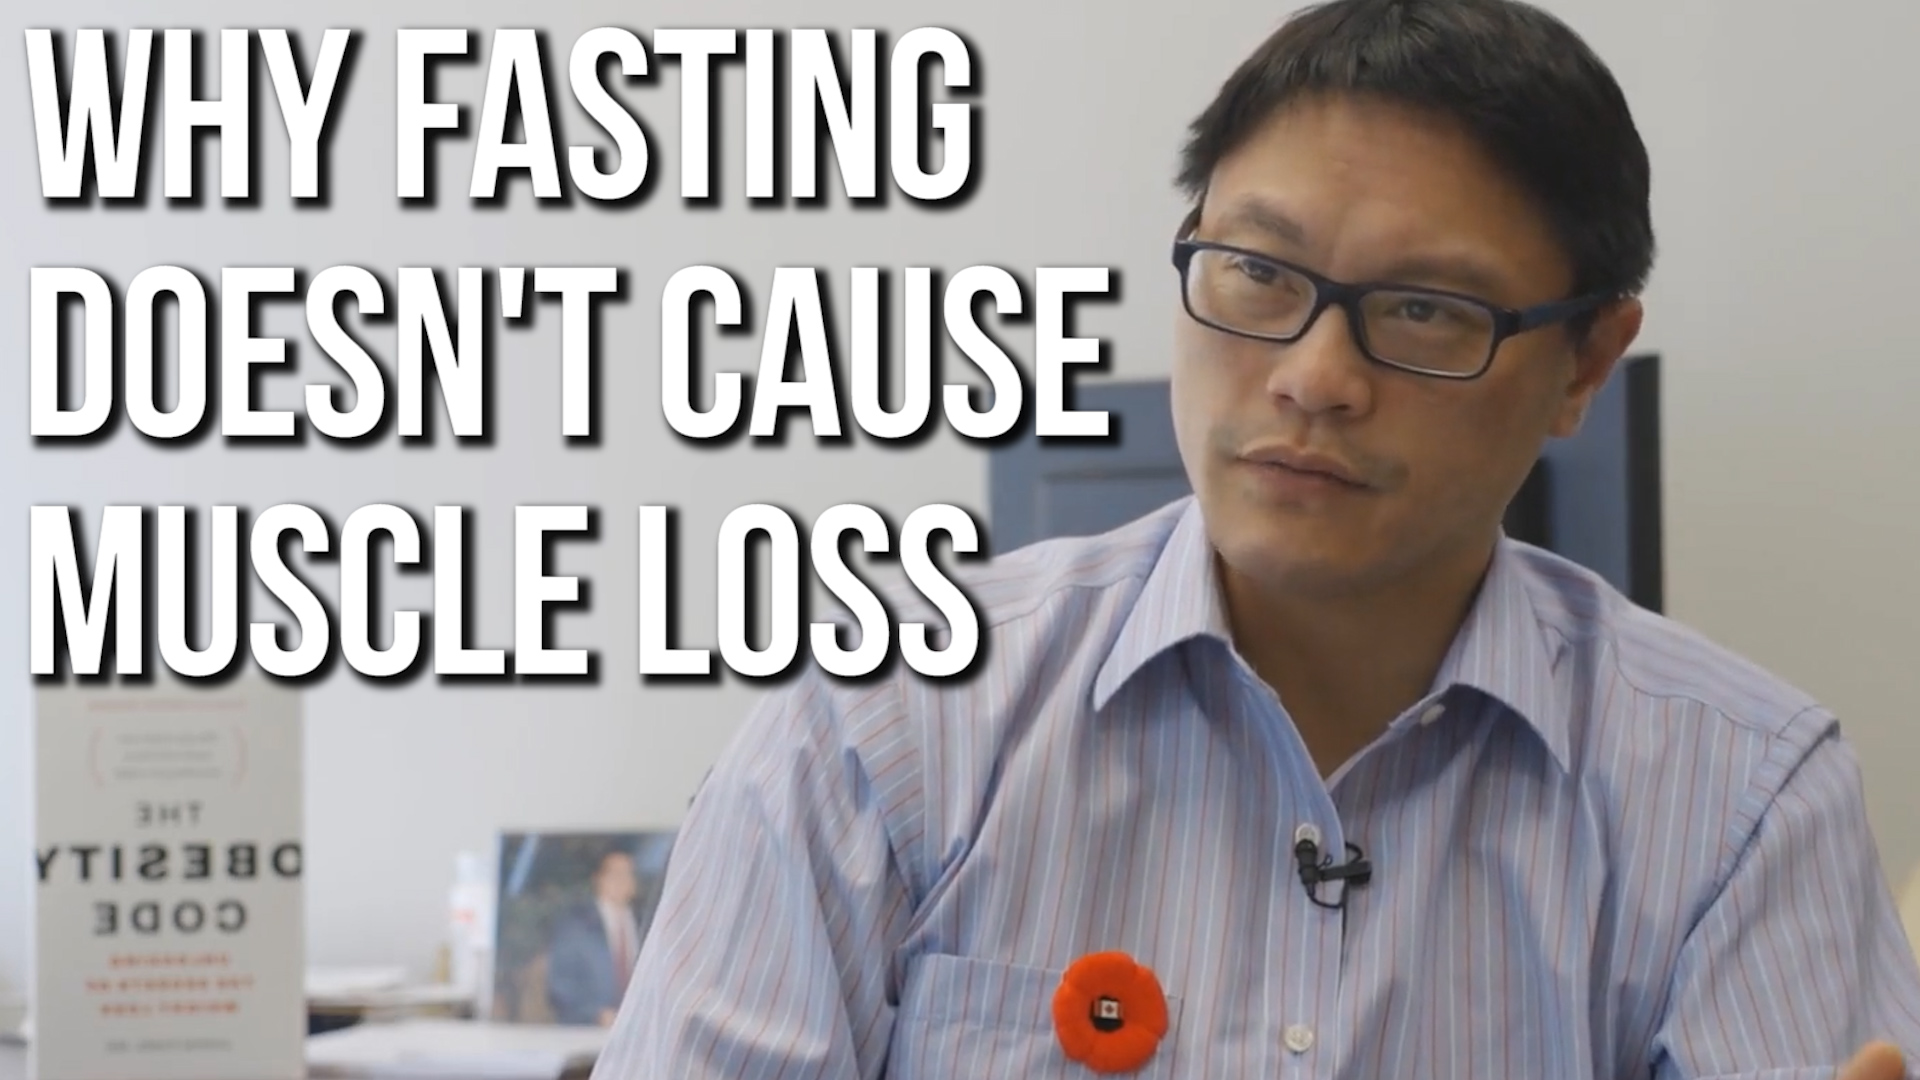 Dr. Jason Fung Fasting Podcast